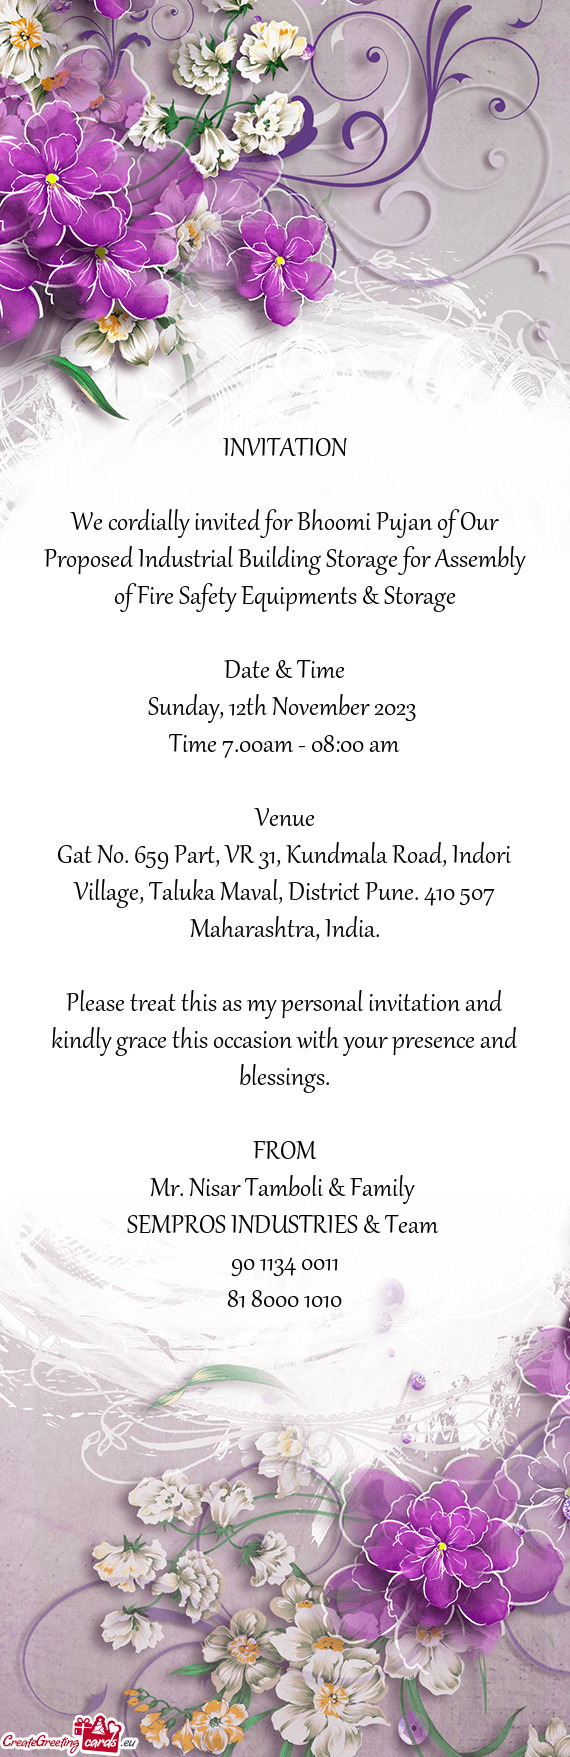 We cordially invited for Bhoomi Pujan of Our Proposed Industrial Building Storage for Assembly of Fi